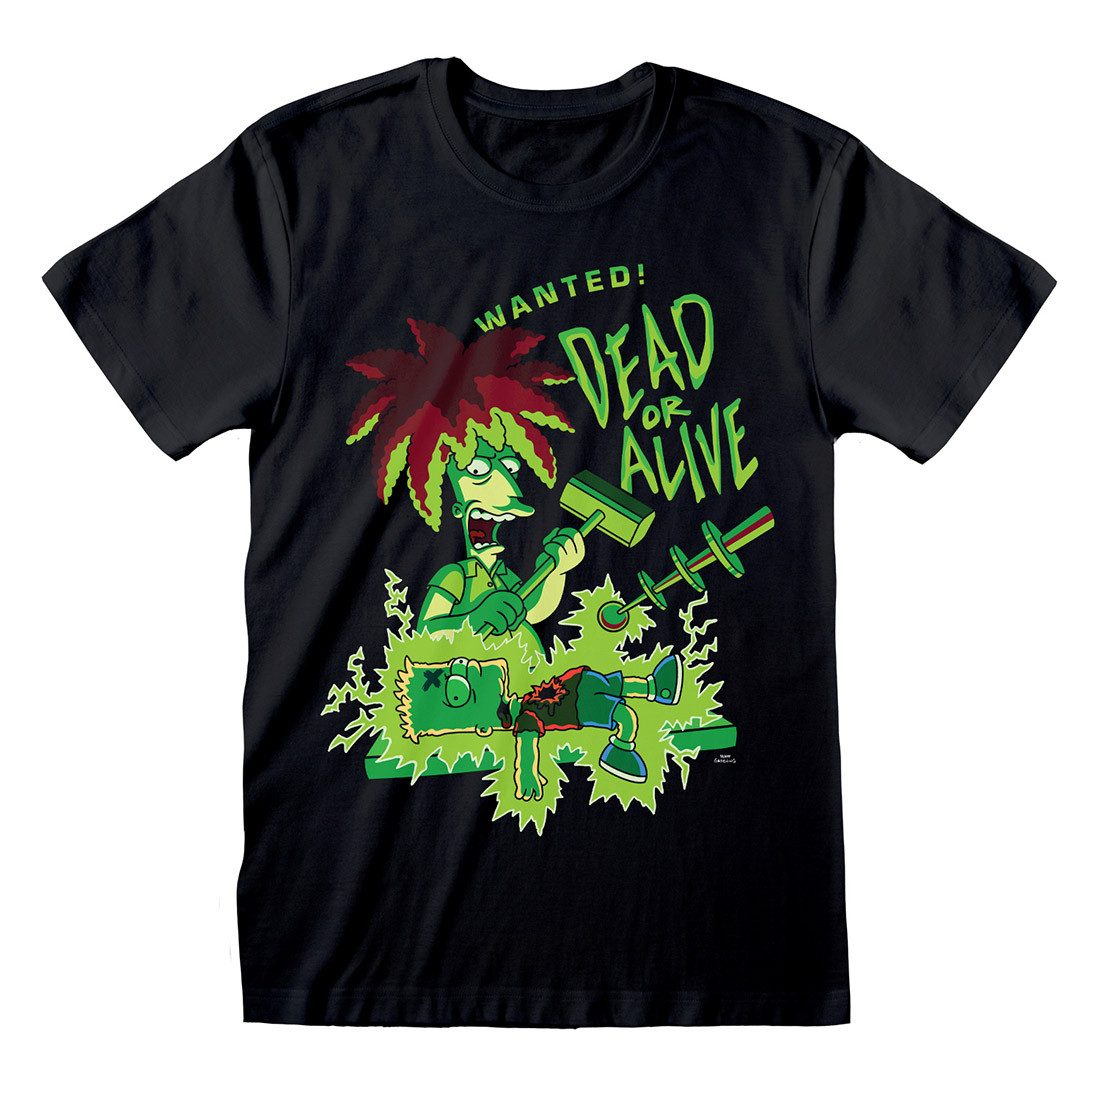 The Simpsons T-Shirt Sideshow Bob Dead Or Alive